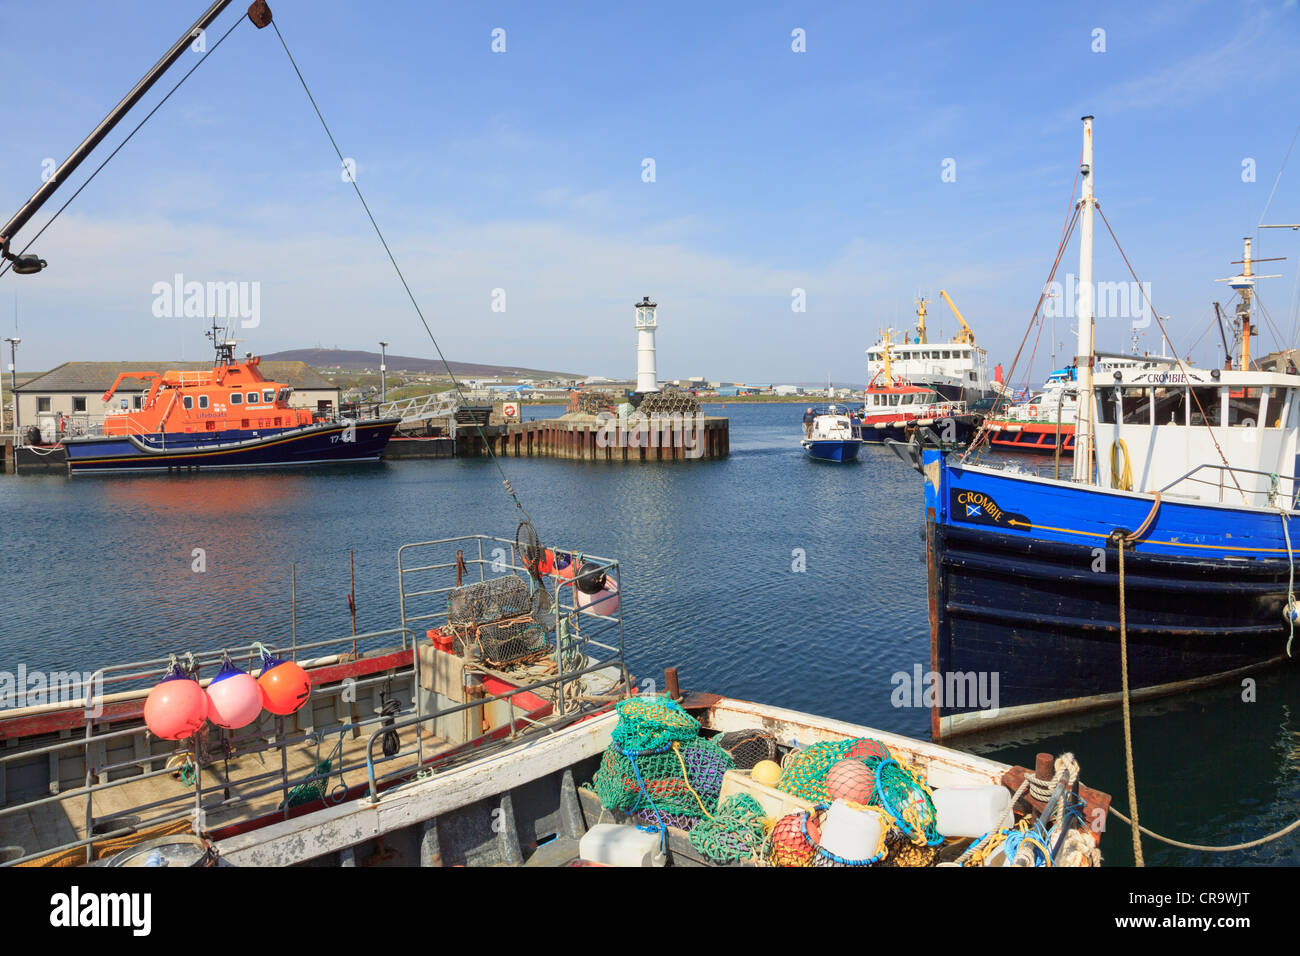 Pelagic fishing boats moored in the inner harbour with RNLI lifeboat beyond in Kirkwall, Orkney Islands Mainland, Scotland, UK Stock Photo